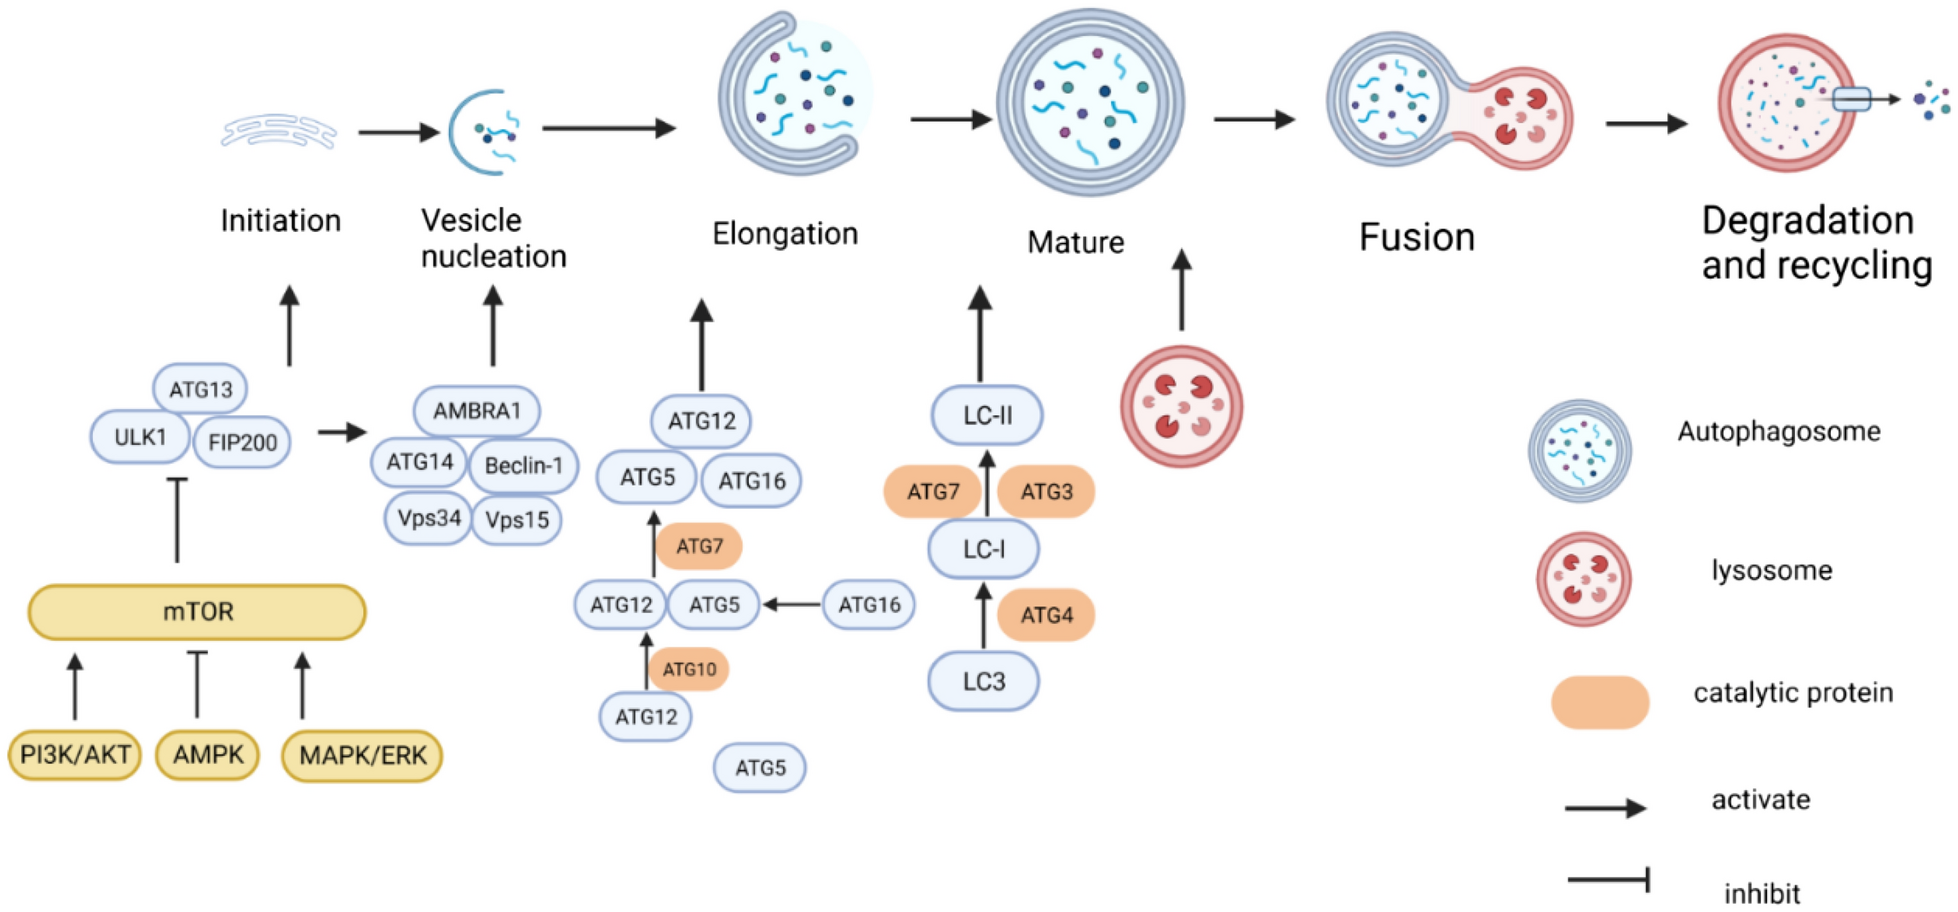 Crosstalk between m6A modification and autophagy in cancer